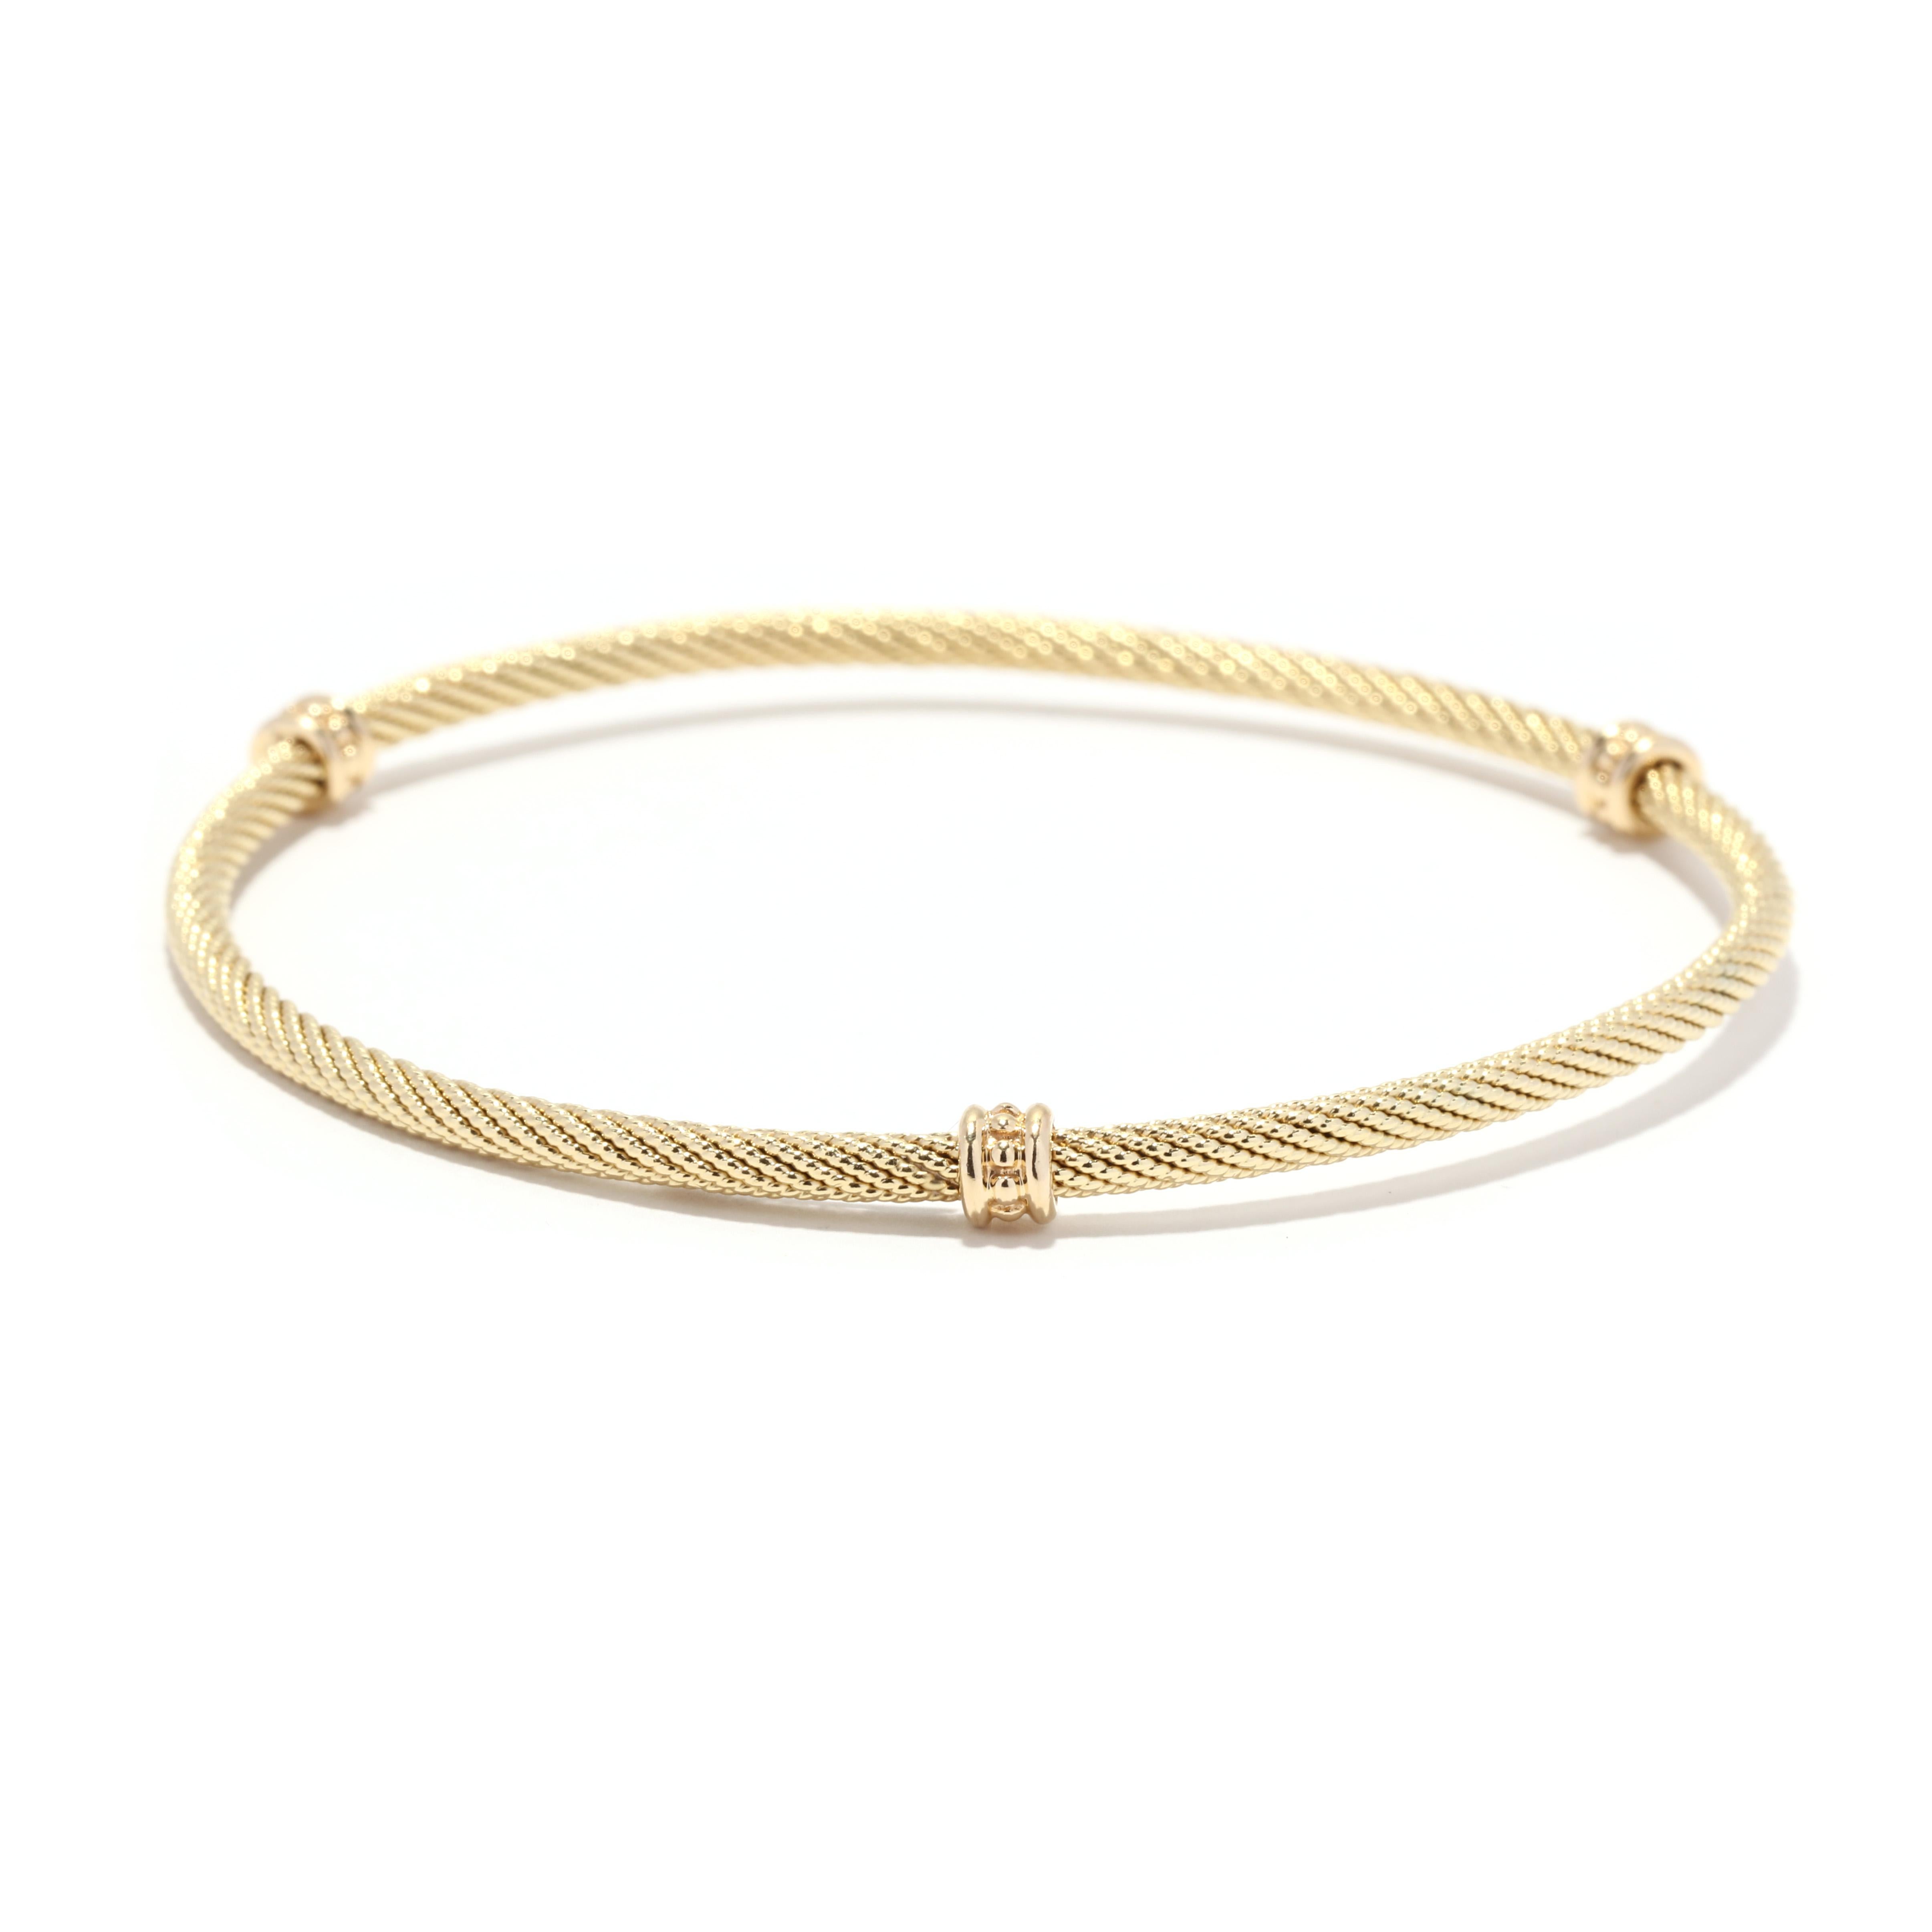 A vintage David Yurman 18 karat yellow gold bangle bracelet. This stackable bangle features a textured cable twist eternity design with three beaded stations throughout.

Circumference: 7.25 in.

Width: 4.65 mm

Weight: 4.9 dwts. / 7.6